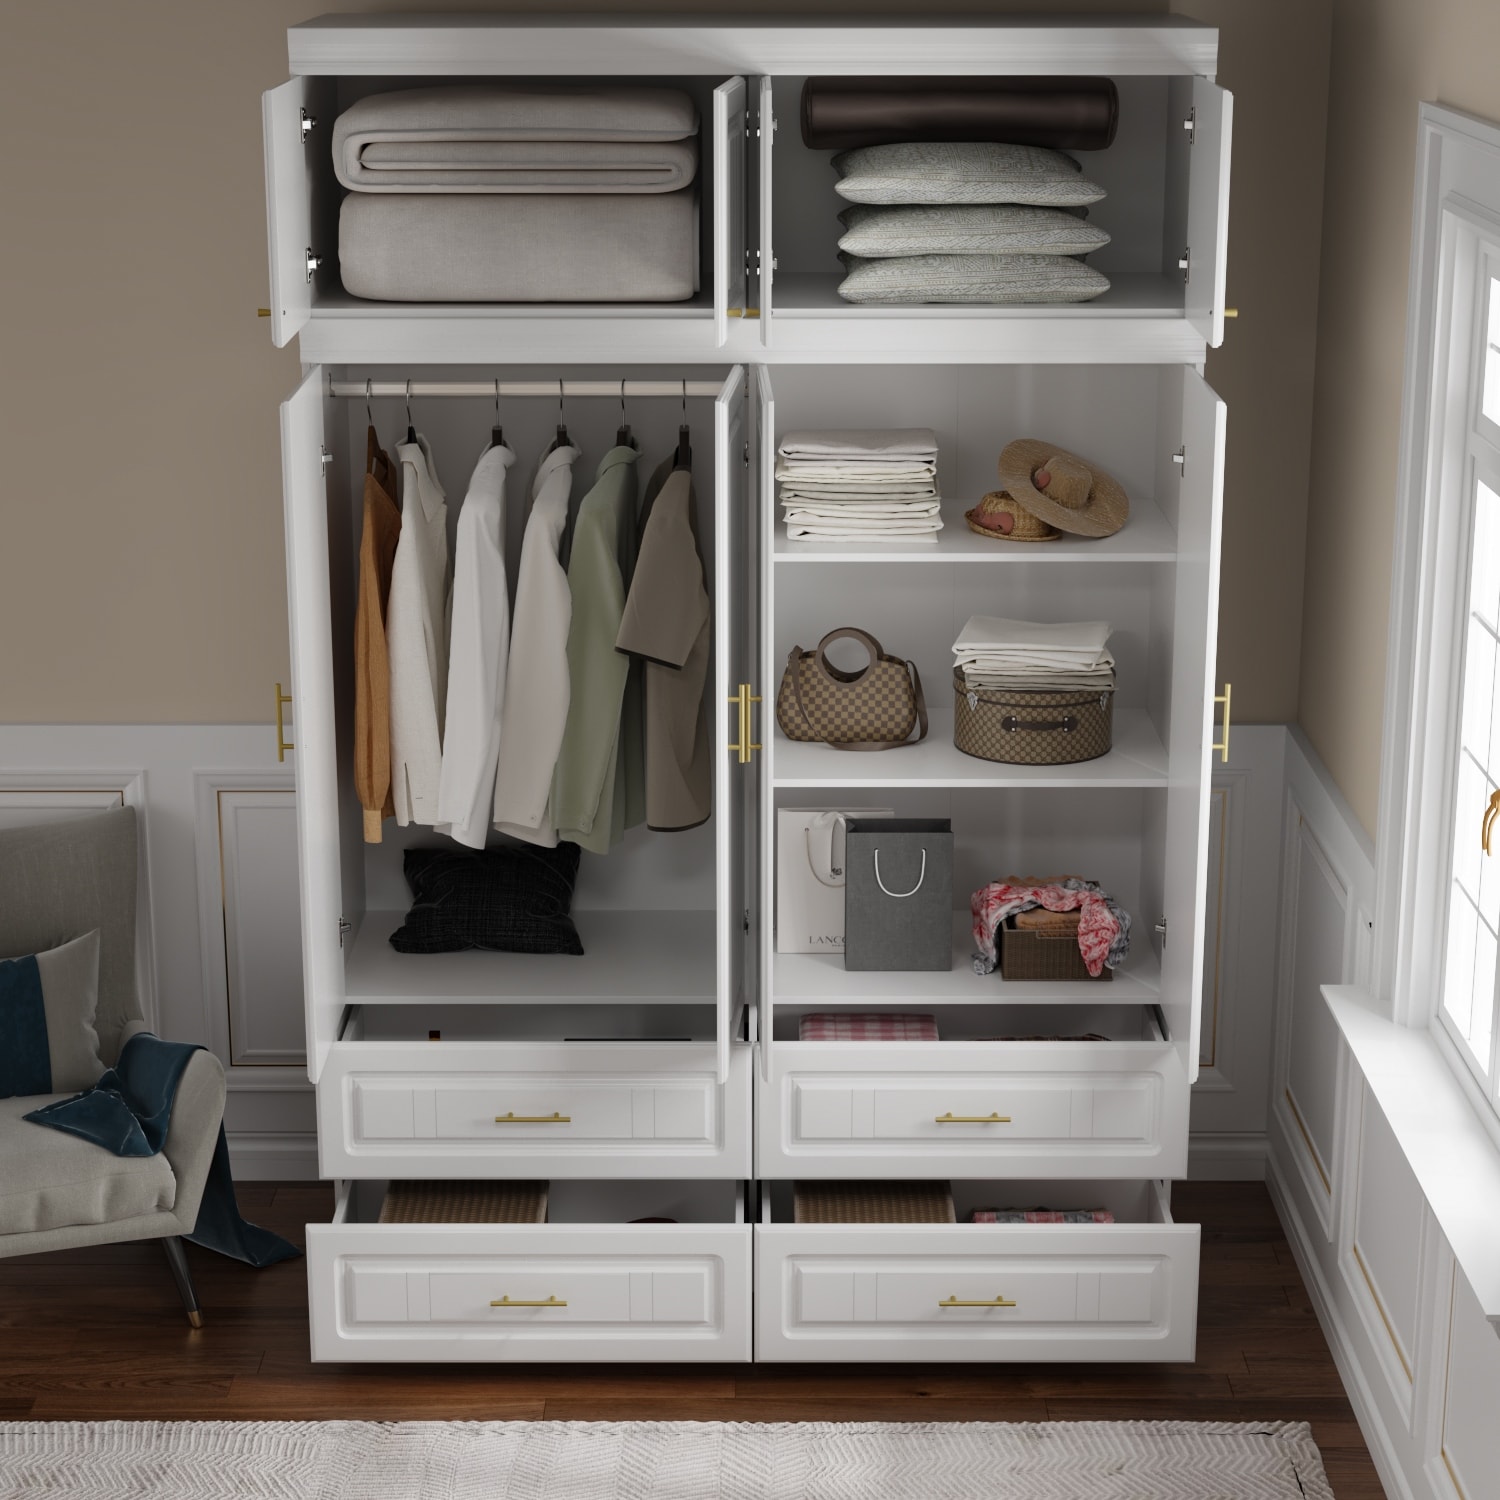 https://ak1.ostkcdn.com/images/products/is/images/direct/53a5e5d801f5483ee5e900afced9290f372cea79/Armoires-and-Wardrobes-with-Storage-Shelves-4-Doors-Top-Cabinet.jpg